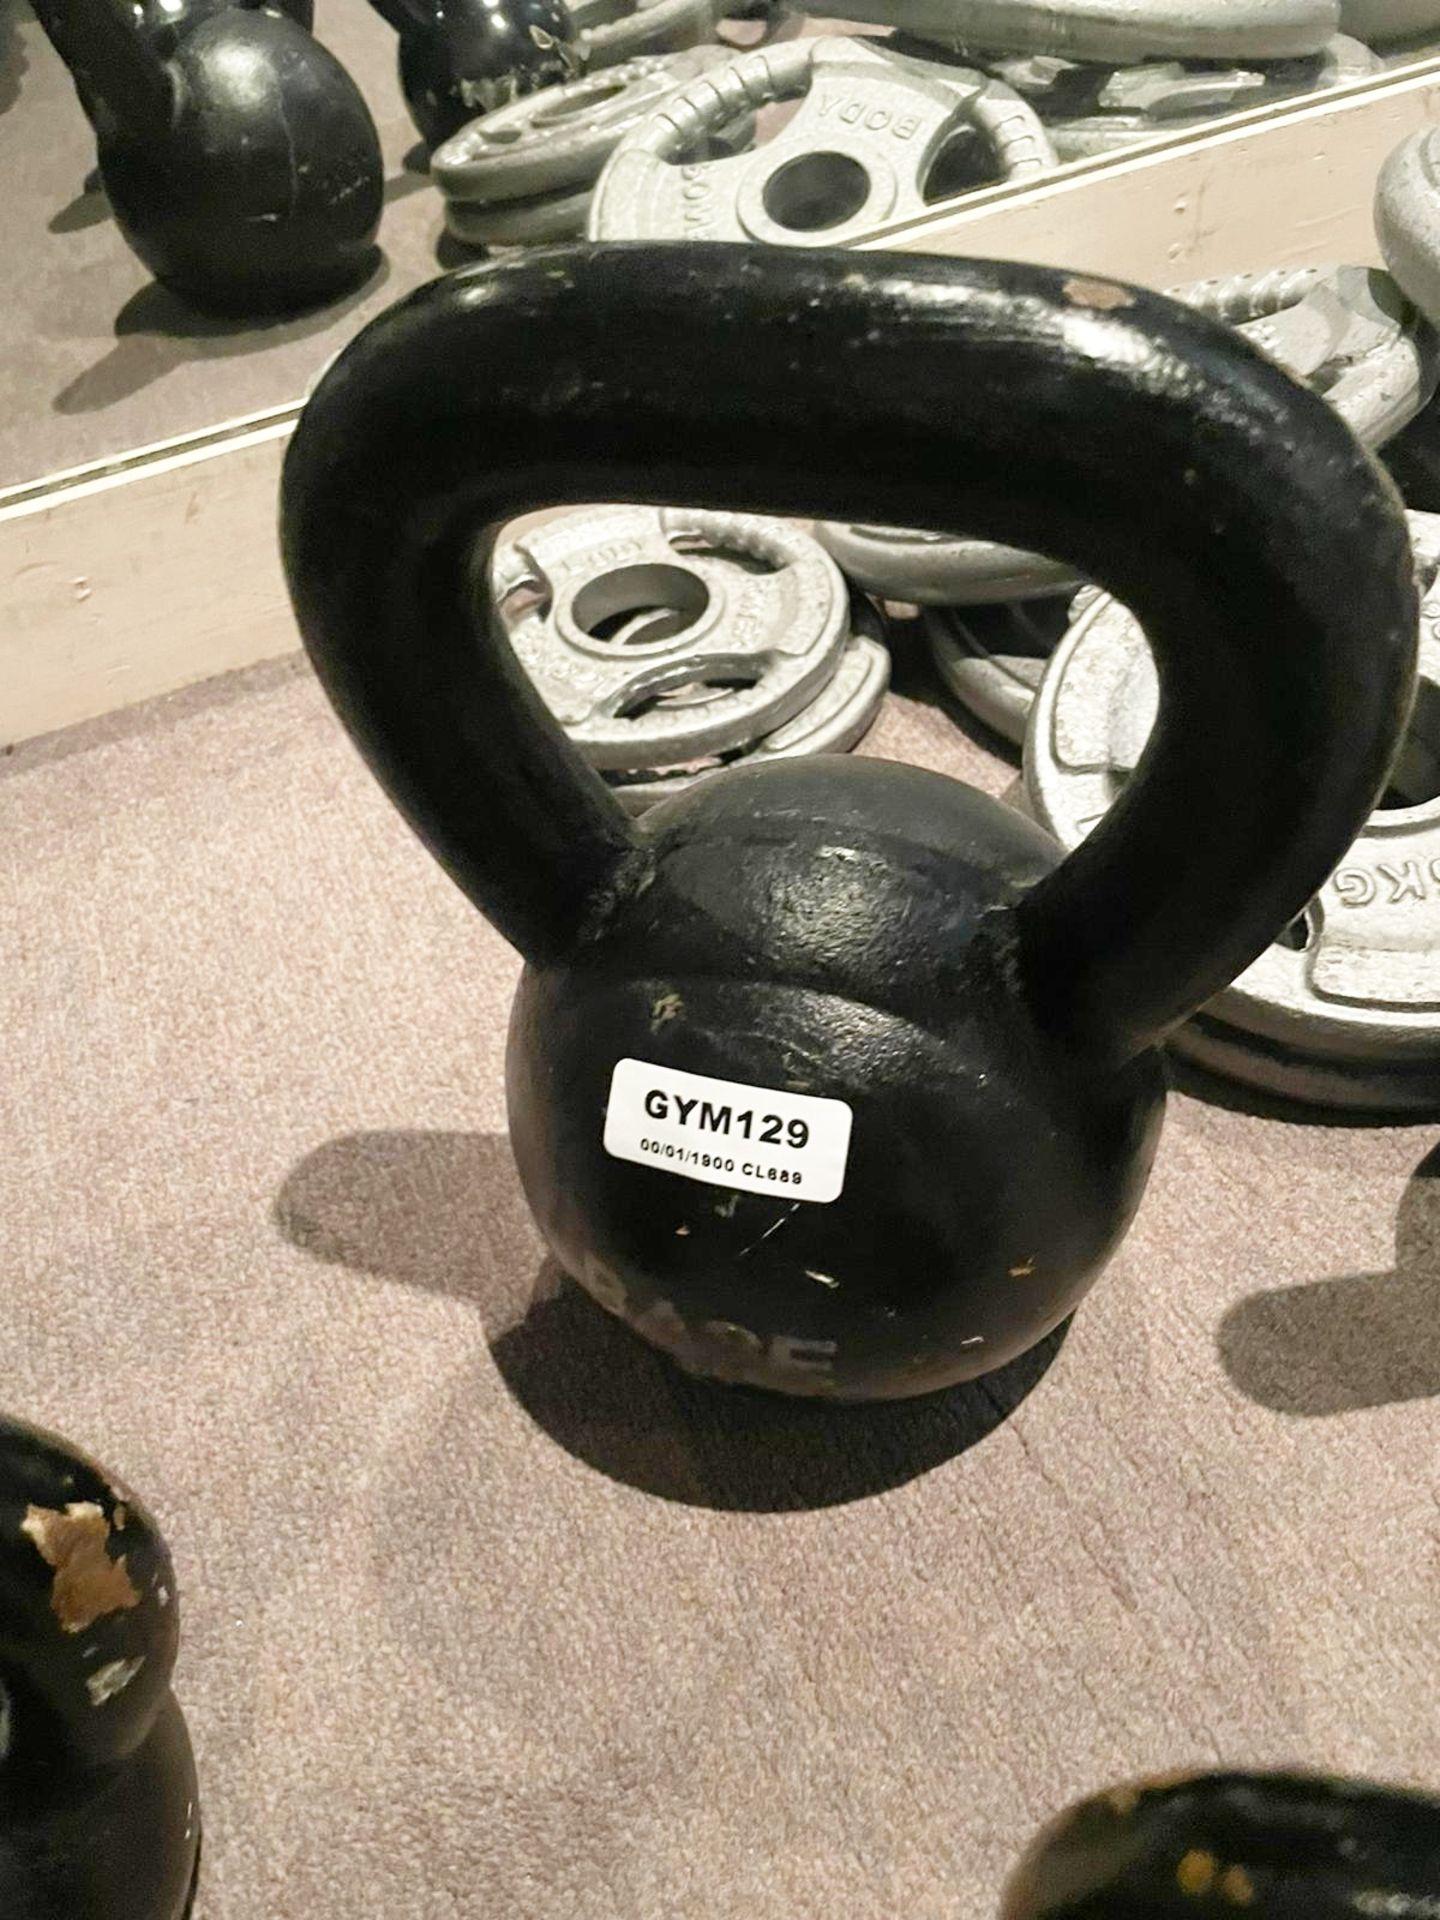 15 x Various Gym Weights - Includes Free Weights, Barbbell Base Weights and York Barbbell Weights